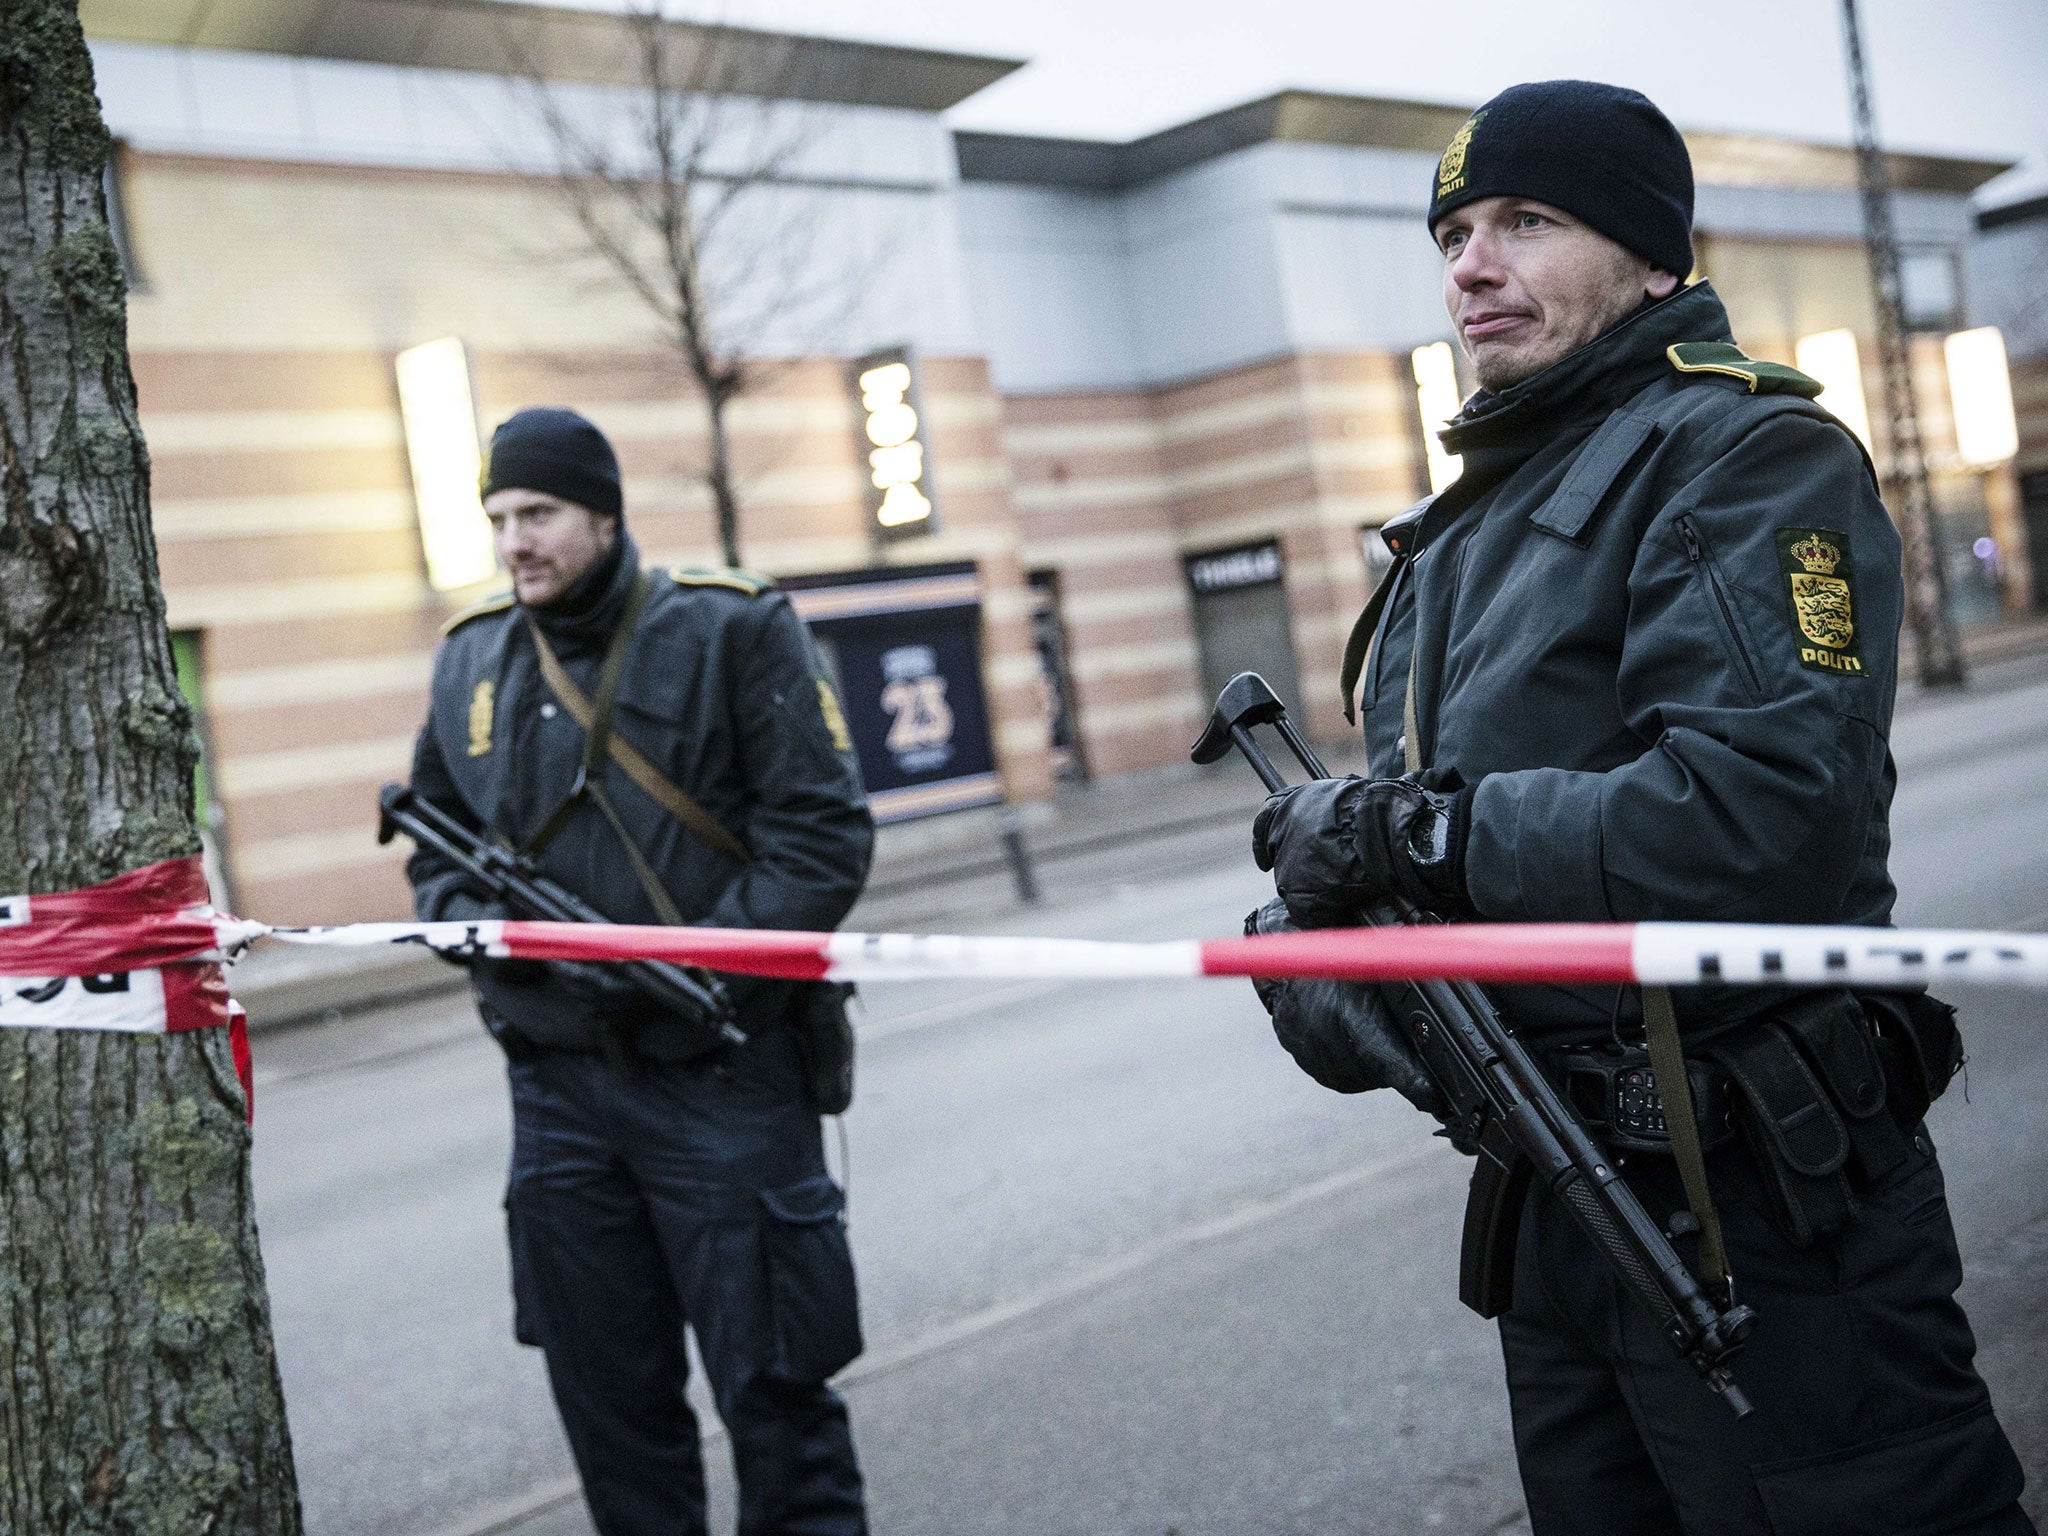 Police were called to the scene in Denmark